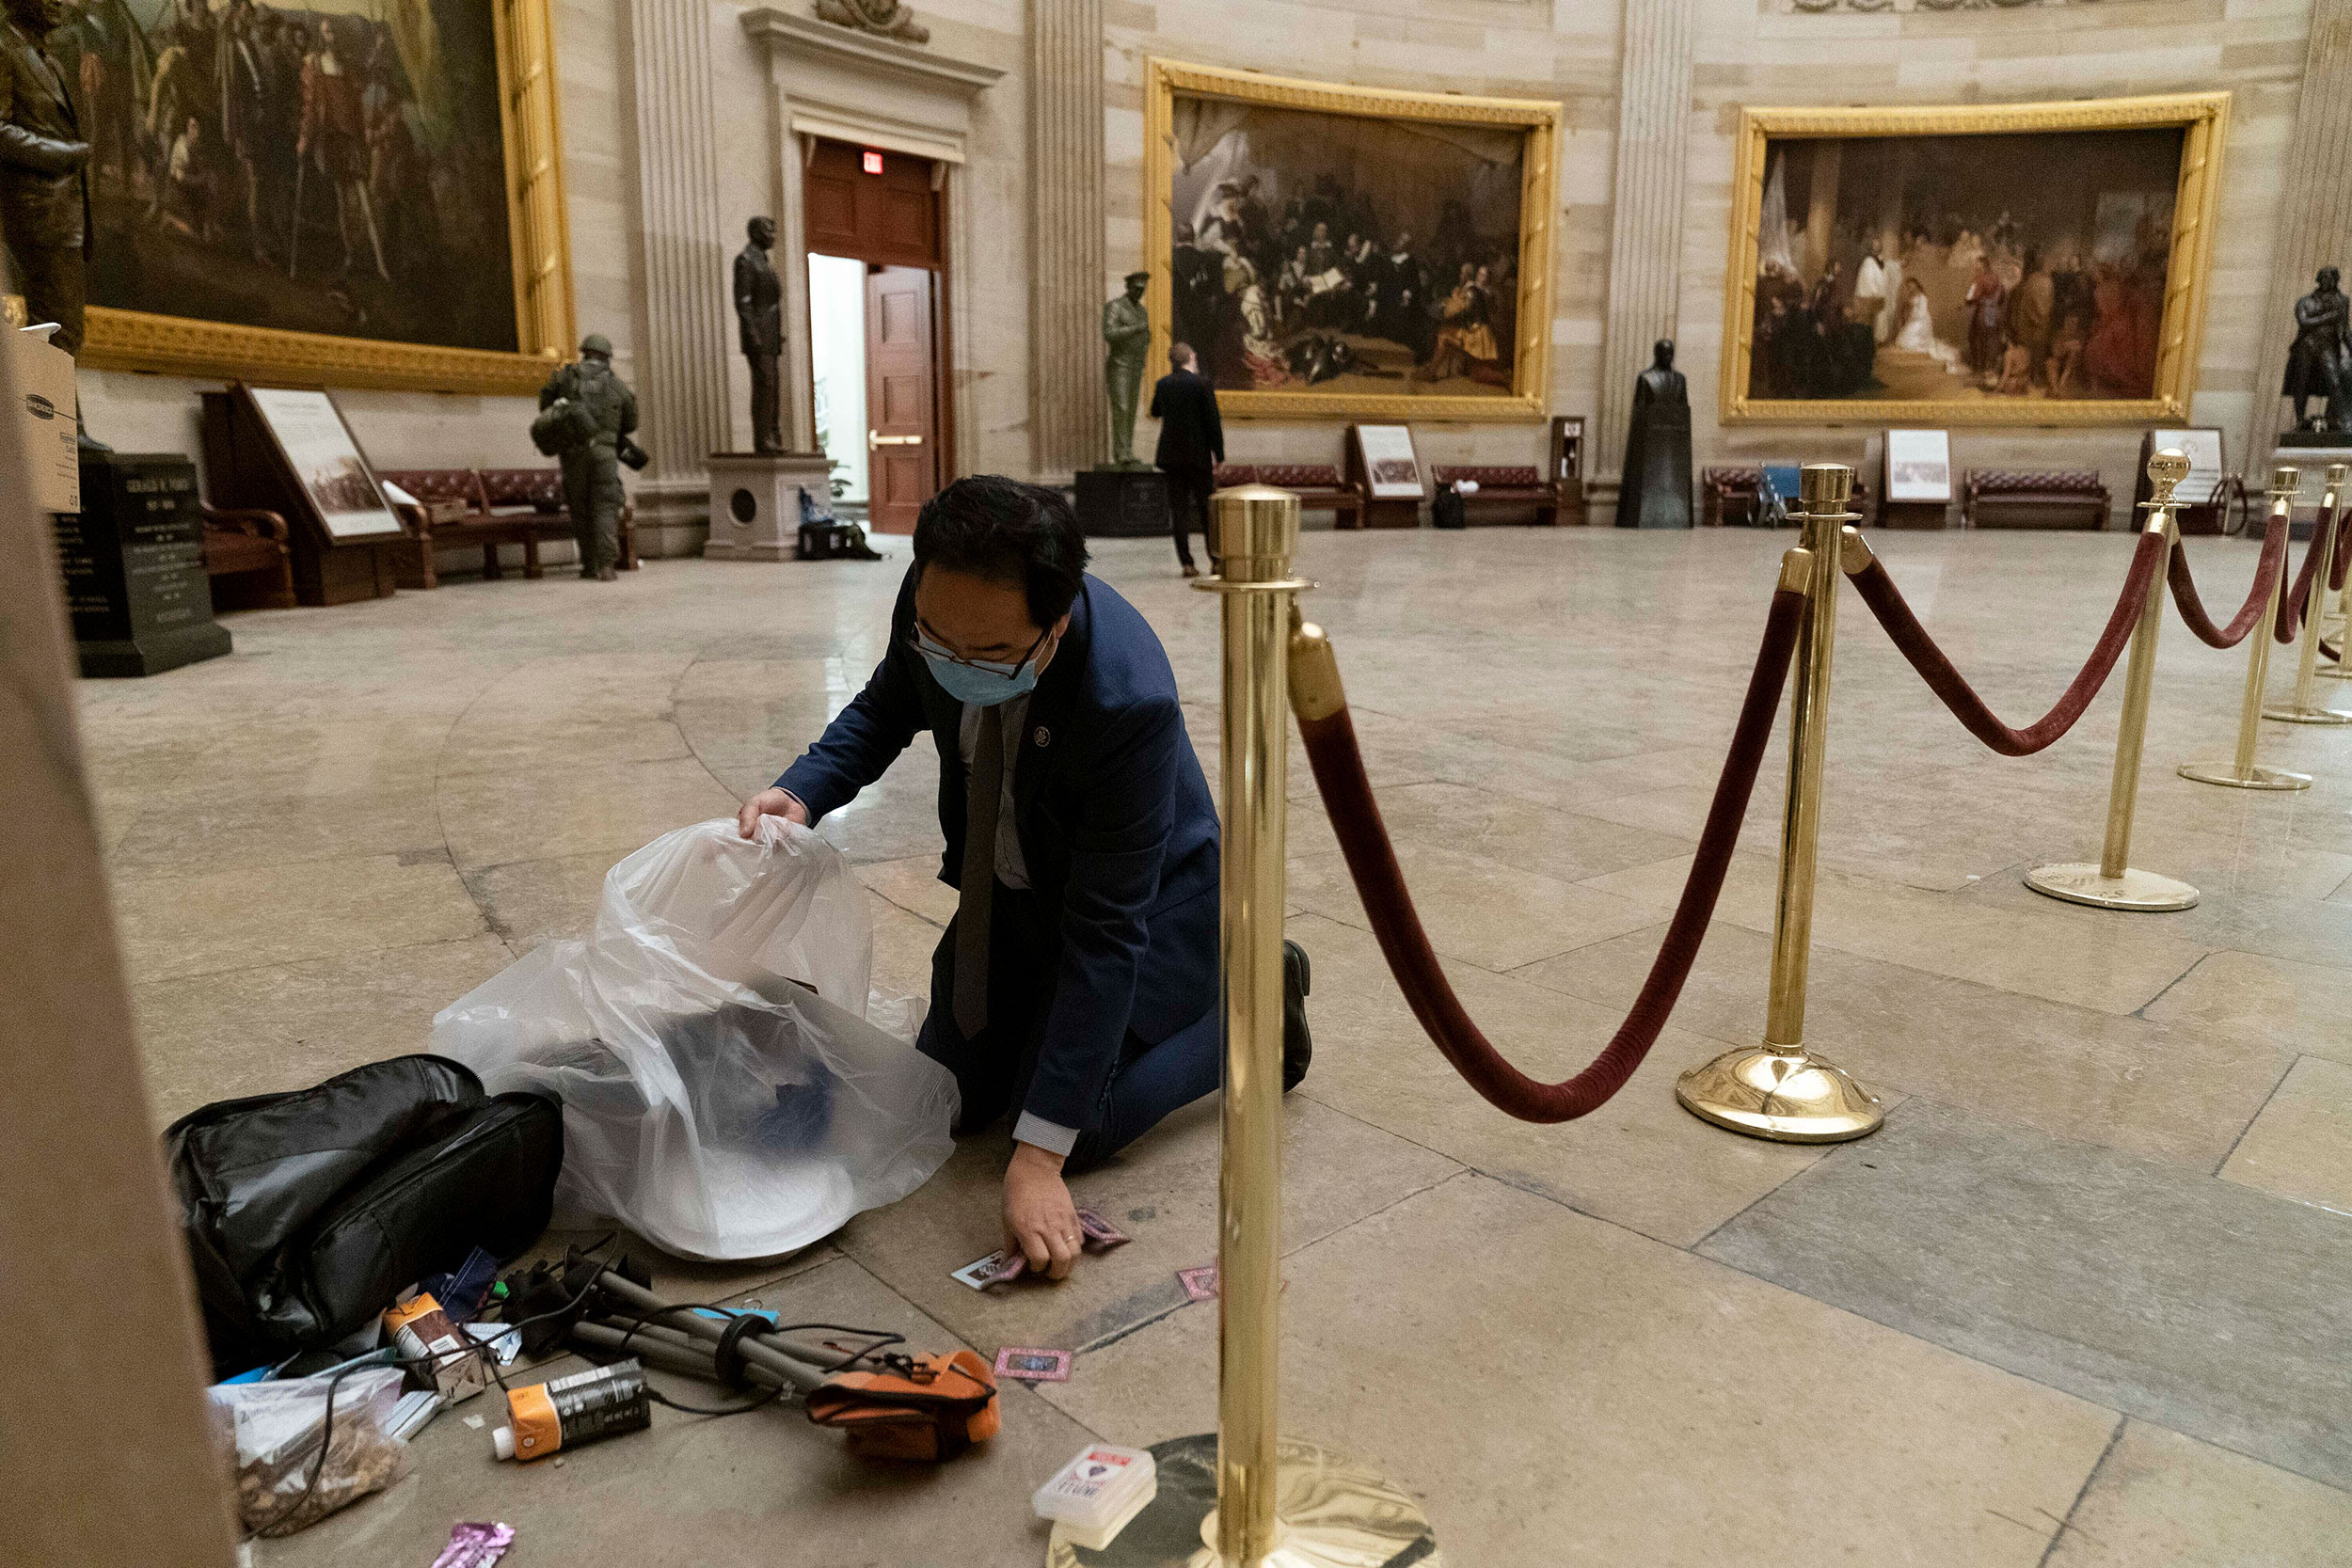 Lawmaker helps clean Capitol after a deadly siege